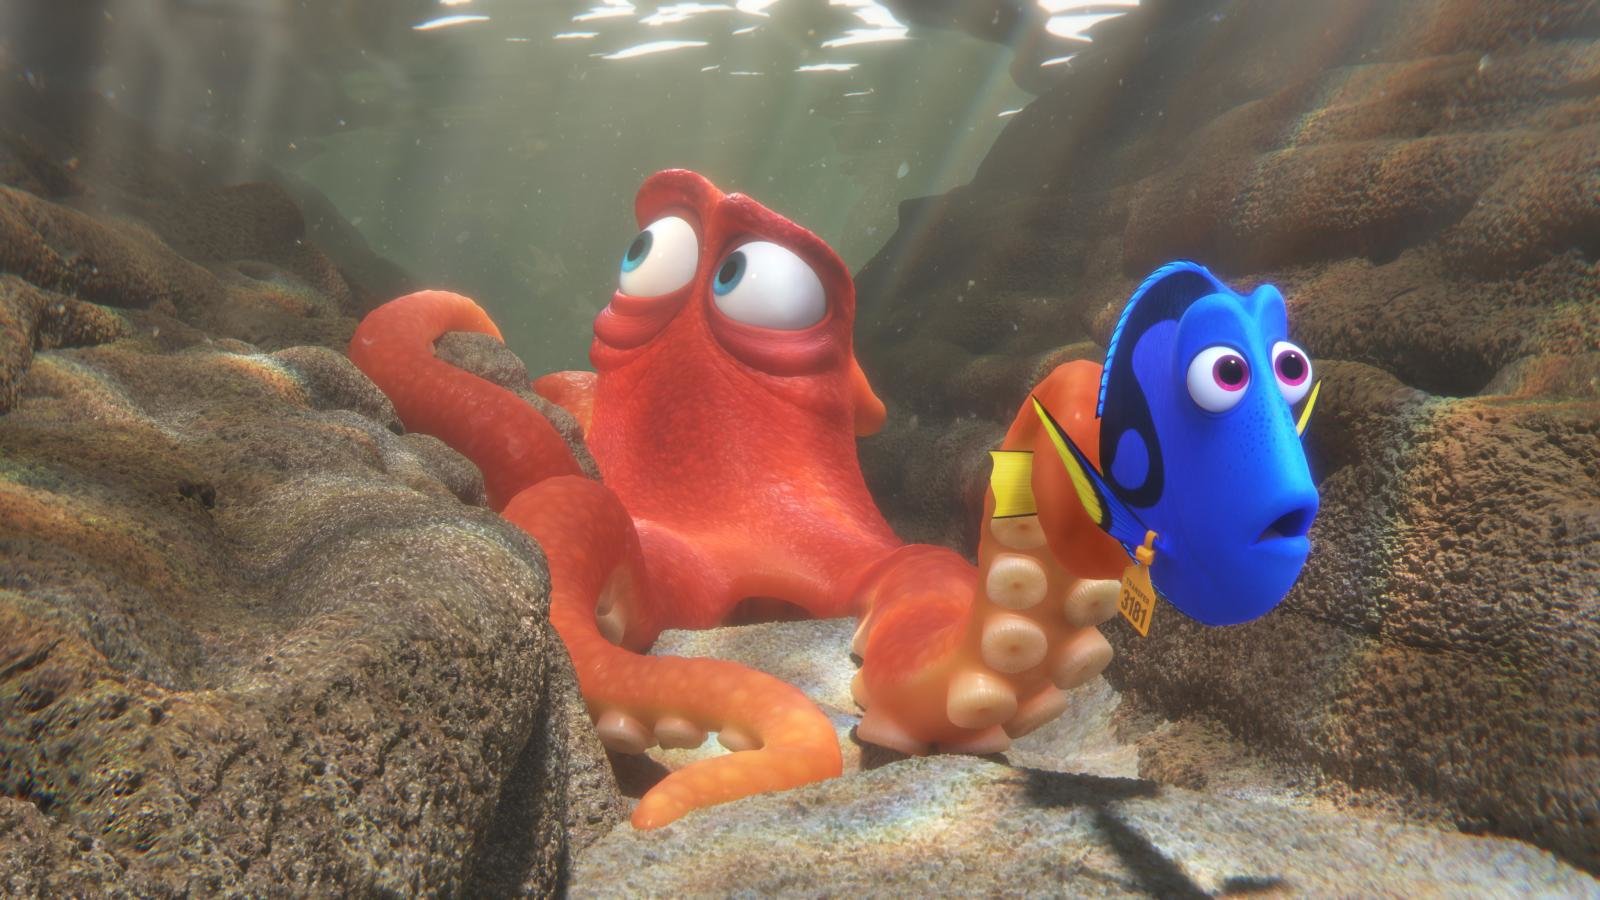 Free Download Finding Dory Wallpaper Id - Find Dory Environments - HD Wallpaper 